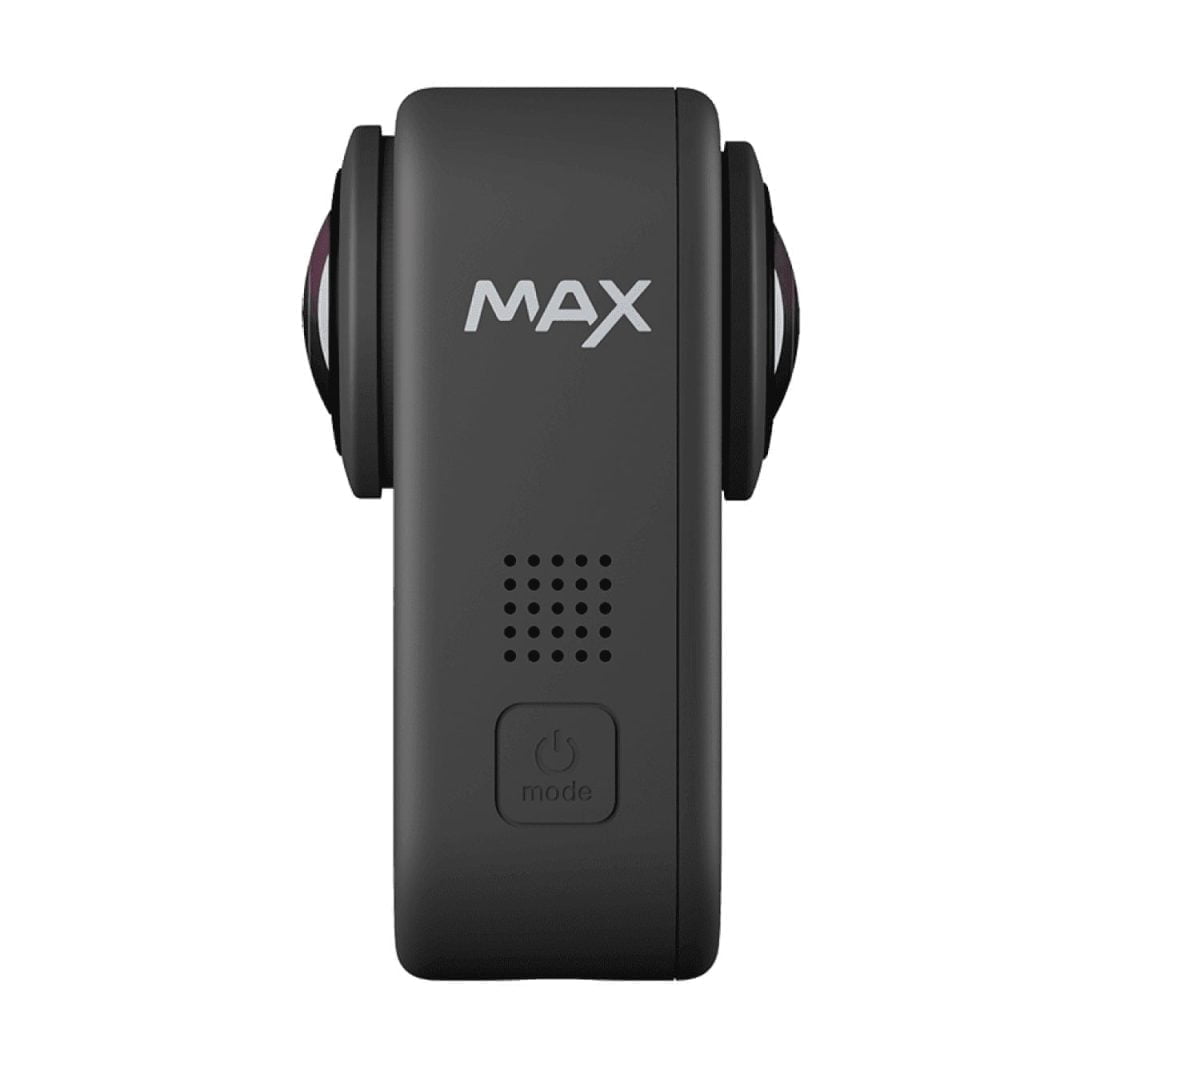 Pdp Max Gallery Side 1920 جوبرو &Lt;H1&Gt;Gopro Max - Waterproof 360 Digital Action Camera With Unbreakable Stabilization, Touch Screen And Voice Control - Live Hd Streaming&Lt;/H1&Gt; &Lt;Div Class=&Quot;Descriptionmodule_Bundles-Container__Skafo Col-Xlarge-6 Col-Large-6 Col-Medium-4 Col-Small-4 Col-Xsmall-8&Quot;&Gt; &Lt;Div Class=&Quot;Descriptionmodule_Detailslist__321Ps&Quot;&Gt; &Lt;P Class=&Quot;Header Header-5&Quot;&Gt;Product Details&Lt;/P&Gt; &Lt;Div Class=&Quot;Row Descriptionmodule_Bundles__3Ah0V Descriptionmodule_Detailitem__1Q3Hp&Quot;&Gt; &Lt;Ul&Gt; &Lt;Li Class=&Quot;Paragraph Paragraph-Small&Quot;&Gt;Shoot Hero Mode Or Go With 360 Mode For Stunning 6K.⁵&Lt;/Li&Gt; &Lt;Li Class=&Quot;Paragraph Paragraph-Small&Quot;&Gt;Unbreakable Stabilization From Max Hypersmooth&Lt;/Li&Gt; &Lt;Li Class=&Quot;Paragraph Paragraph-Small&Quot;&Gt;Waterproof To 16Ft + Built Tough&Lt;/Li&Gt; &Lt;Li Class=&Quot;Paragraph Paragraph-Small&Quot;&Gt;Premium 360 + Stereo Audio From 6 Mics&Lt;/Li&Gt; &Lt;Li Class=&Quot;Paragraph Paragraph-Small&Quot;&Gt;Vlog To The Max With 1080P Live Streaming&Lt;/Li&Gt; &Lt;Li Class=&Quot;Paragraph Paragraph-Small&Quot;&Gt;Max Timewarp, Powerpano, 4 Digital Lenses + So Many Other Features To Nail Any Shot&Lt;/Li&Gt; &Lt;Li Class=&Quot;Paragraph Paragraph-Small&Quot;&Gt;Compatible With Quik App&Lt;/Li&Gt; &Lt;Li Class=&Quot;Paragraph Paragraph-Small&Quot;&Gt;Compatible With Over 30 Mounts + Accessories&Lt;/Li&Gt; &Lt;/Ul&Gt; &Lt;/Div&Gt; &Lt;/Div&Gt; &Lt;/Div&Gt; &Nbsp; Gopro Max Gopro Max - Waterproof 360 Digital Action Camera With Unbreakable Stabilization, Touch Screen And Voice Control - Live Hd Streaming